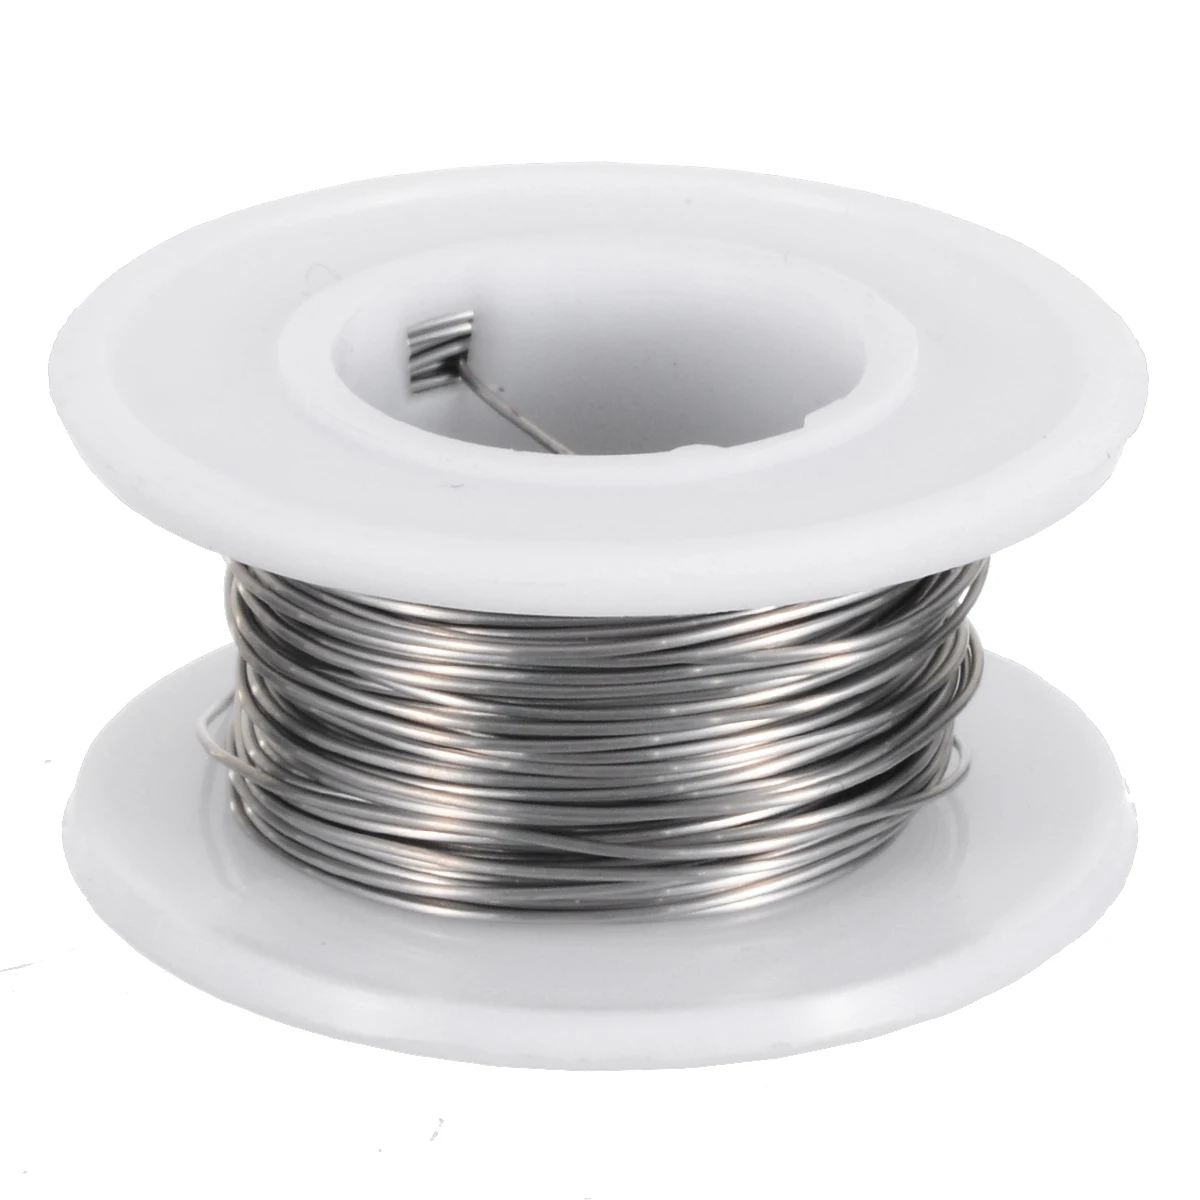 

1 Roll 0.5mm Diam Cr20Ni80 Heating Wire 10M Nichrome Wire Practical Resistance Wires Home Industry Supplies